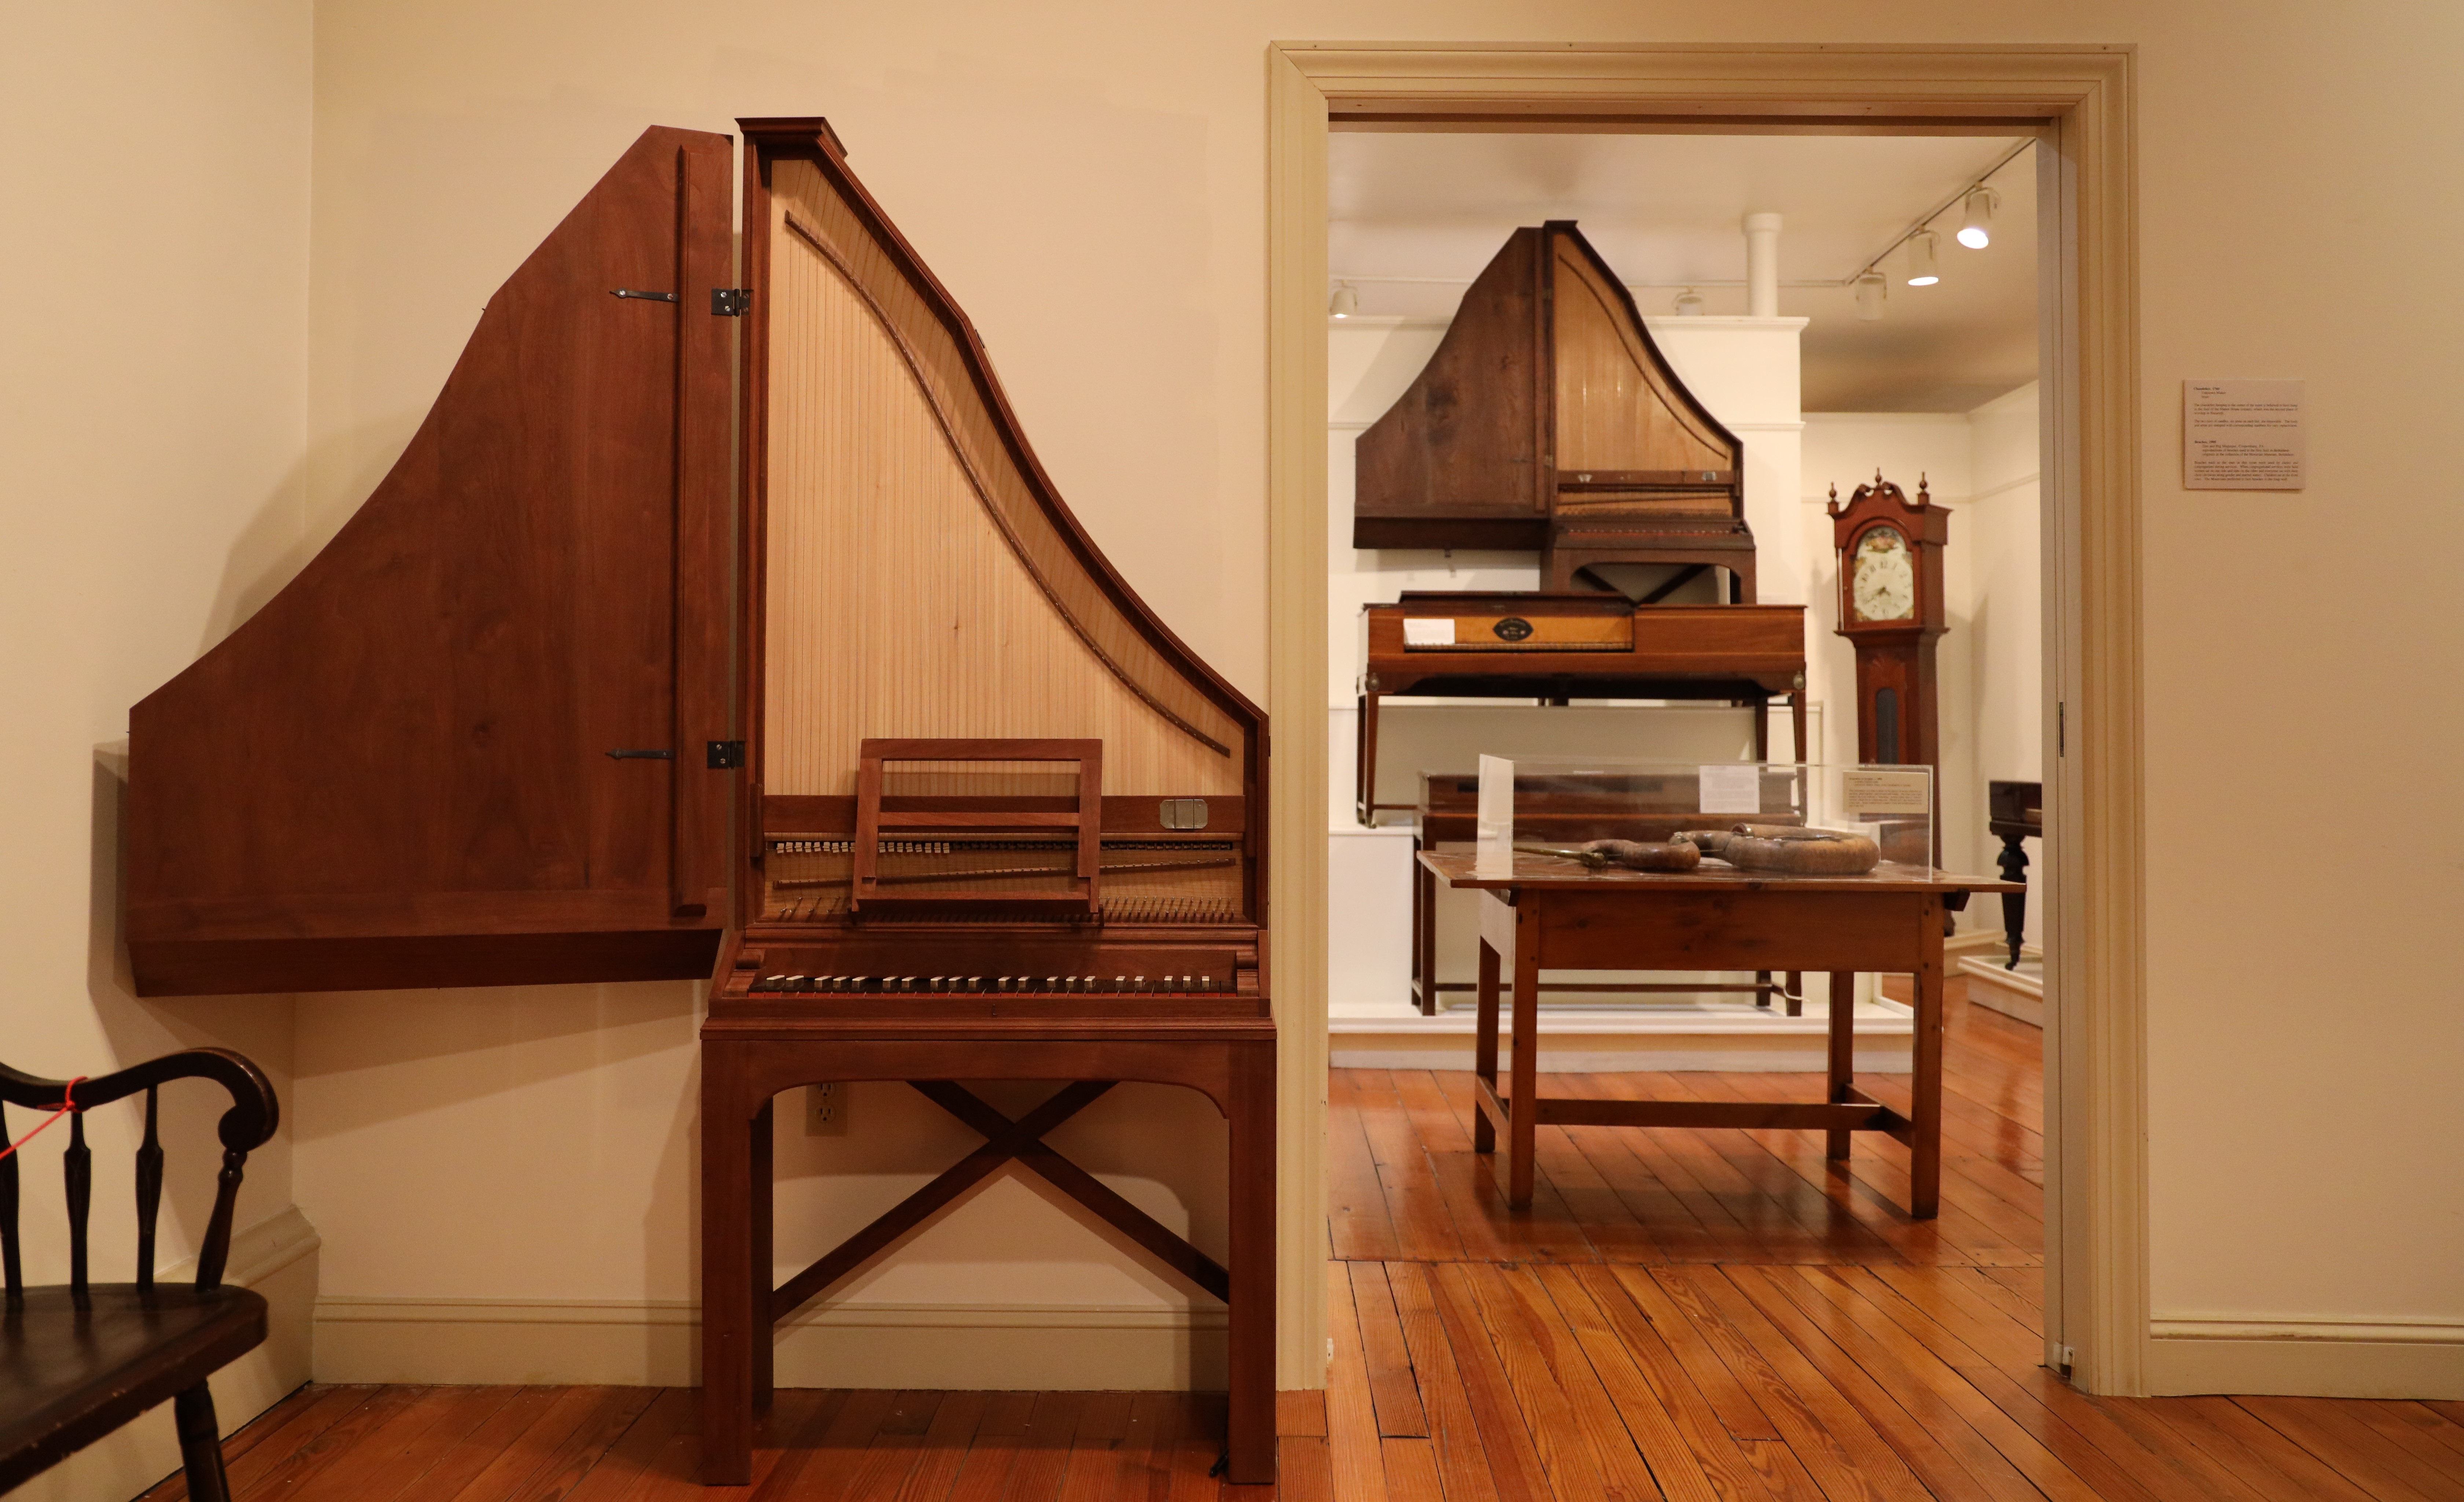 Upright Pianos in Moravian Historical Society